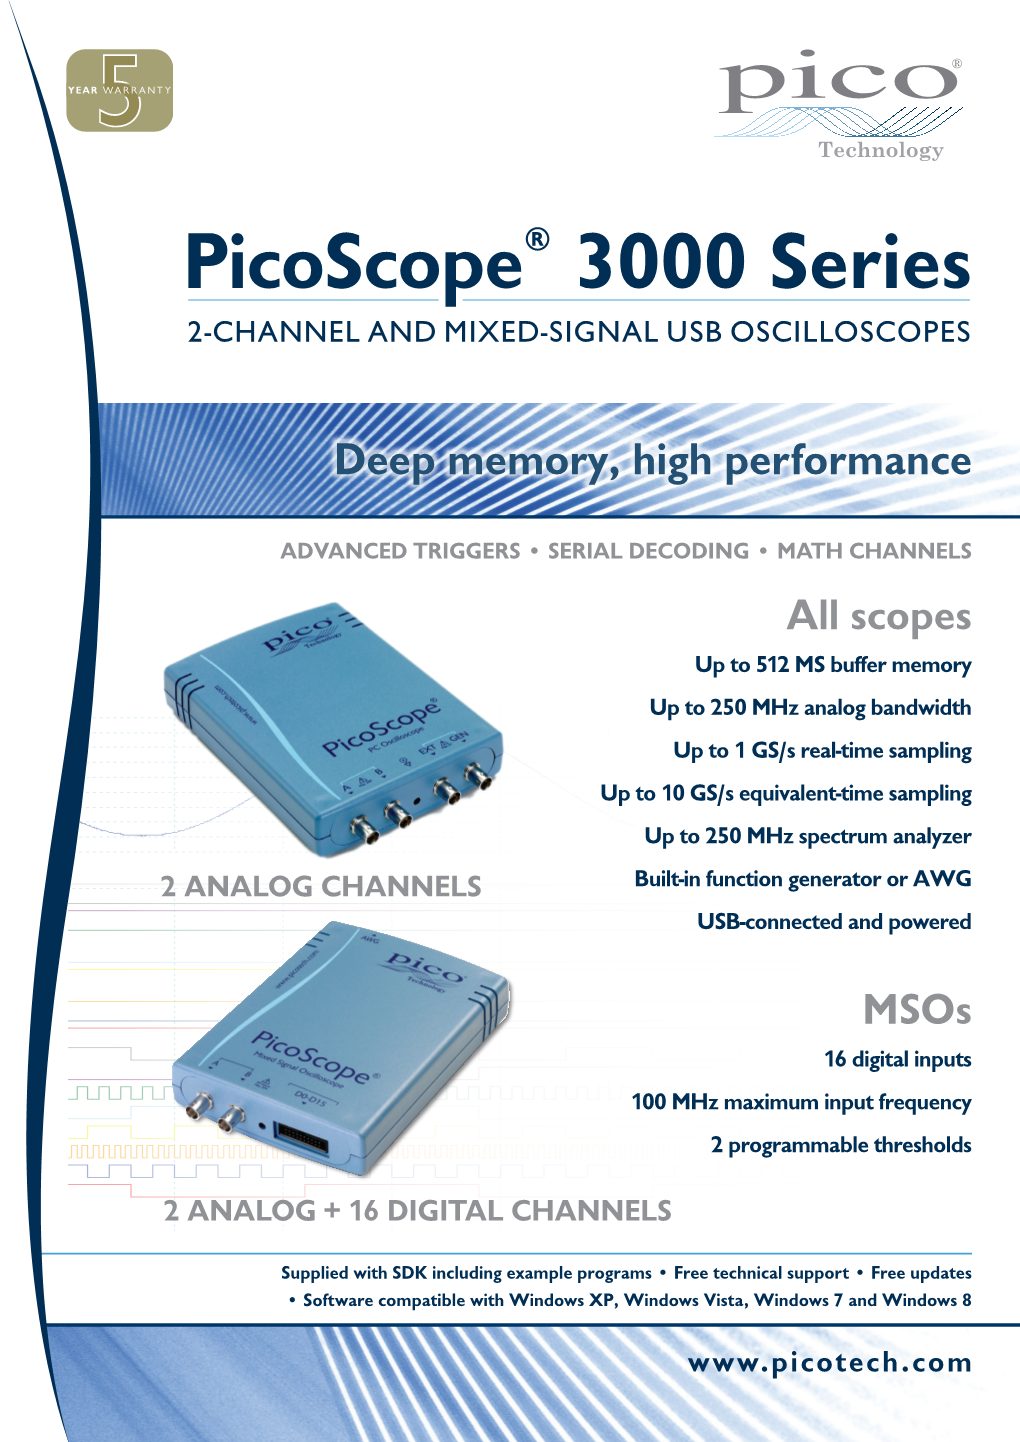 Picoscope® 3000 Series 2-CHANNEL and MIXED-SIGNAL USB OSCILLOSCOPES